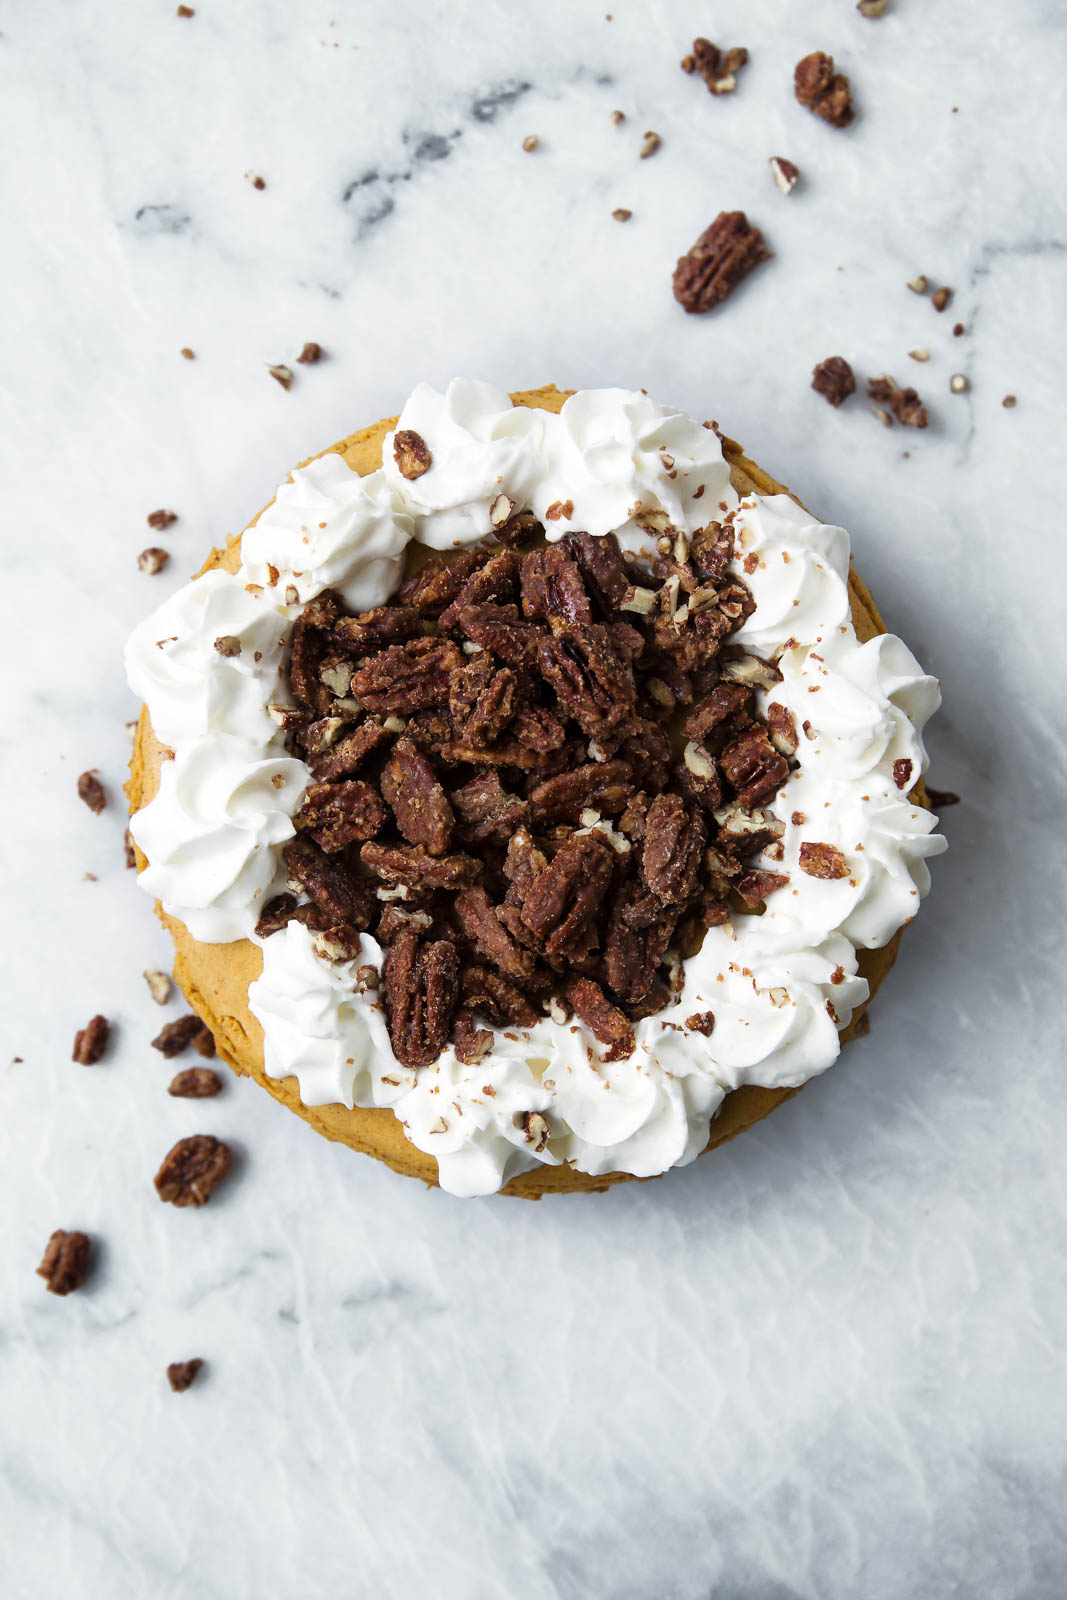 pumpkin cheesecake with whipped cream and candied pecans on top